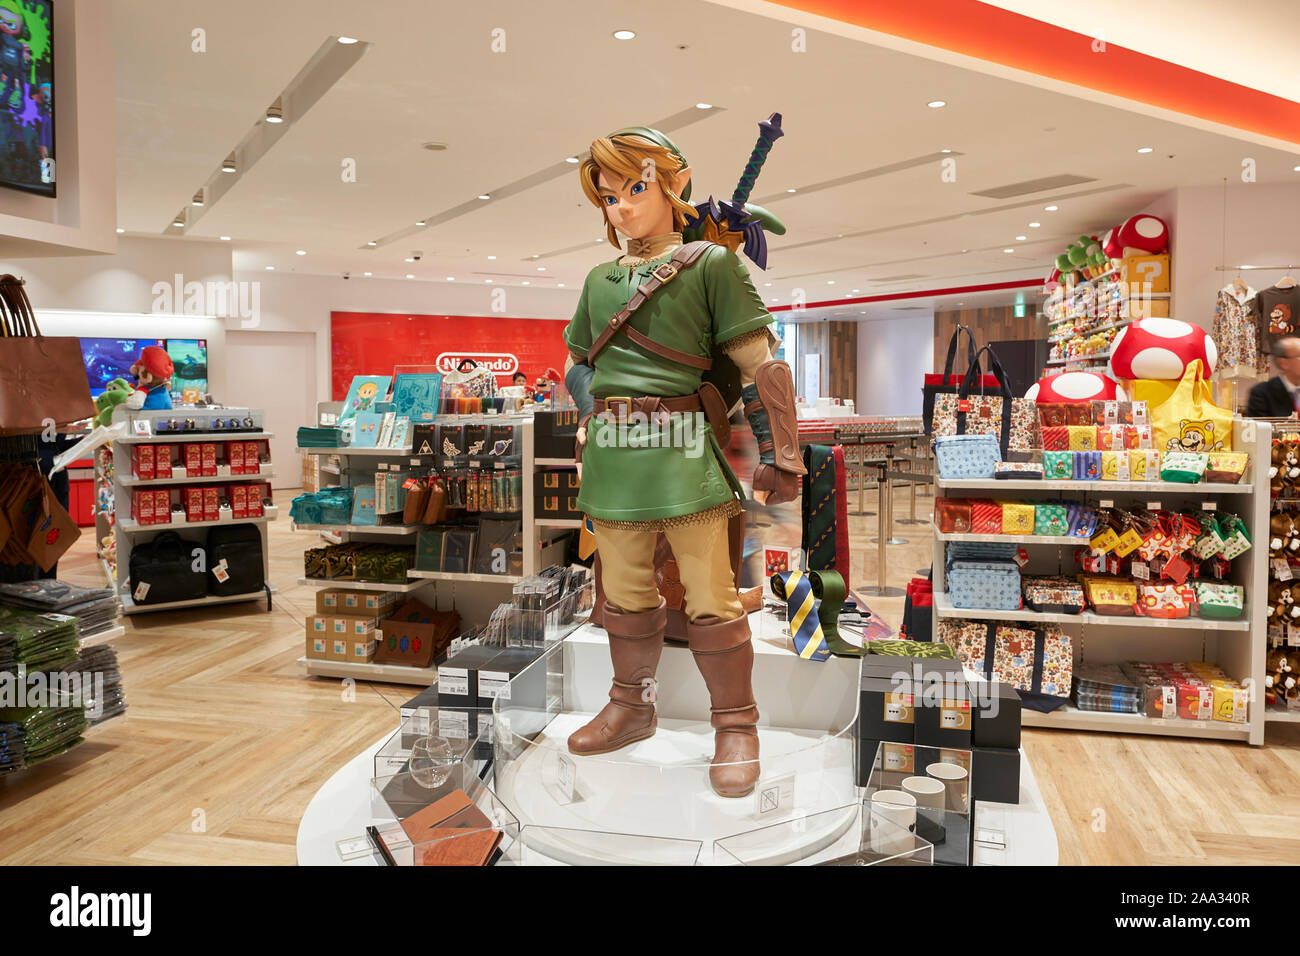 Gallery: The first images of Nintendo's Tokyo Store